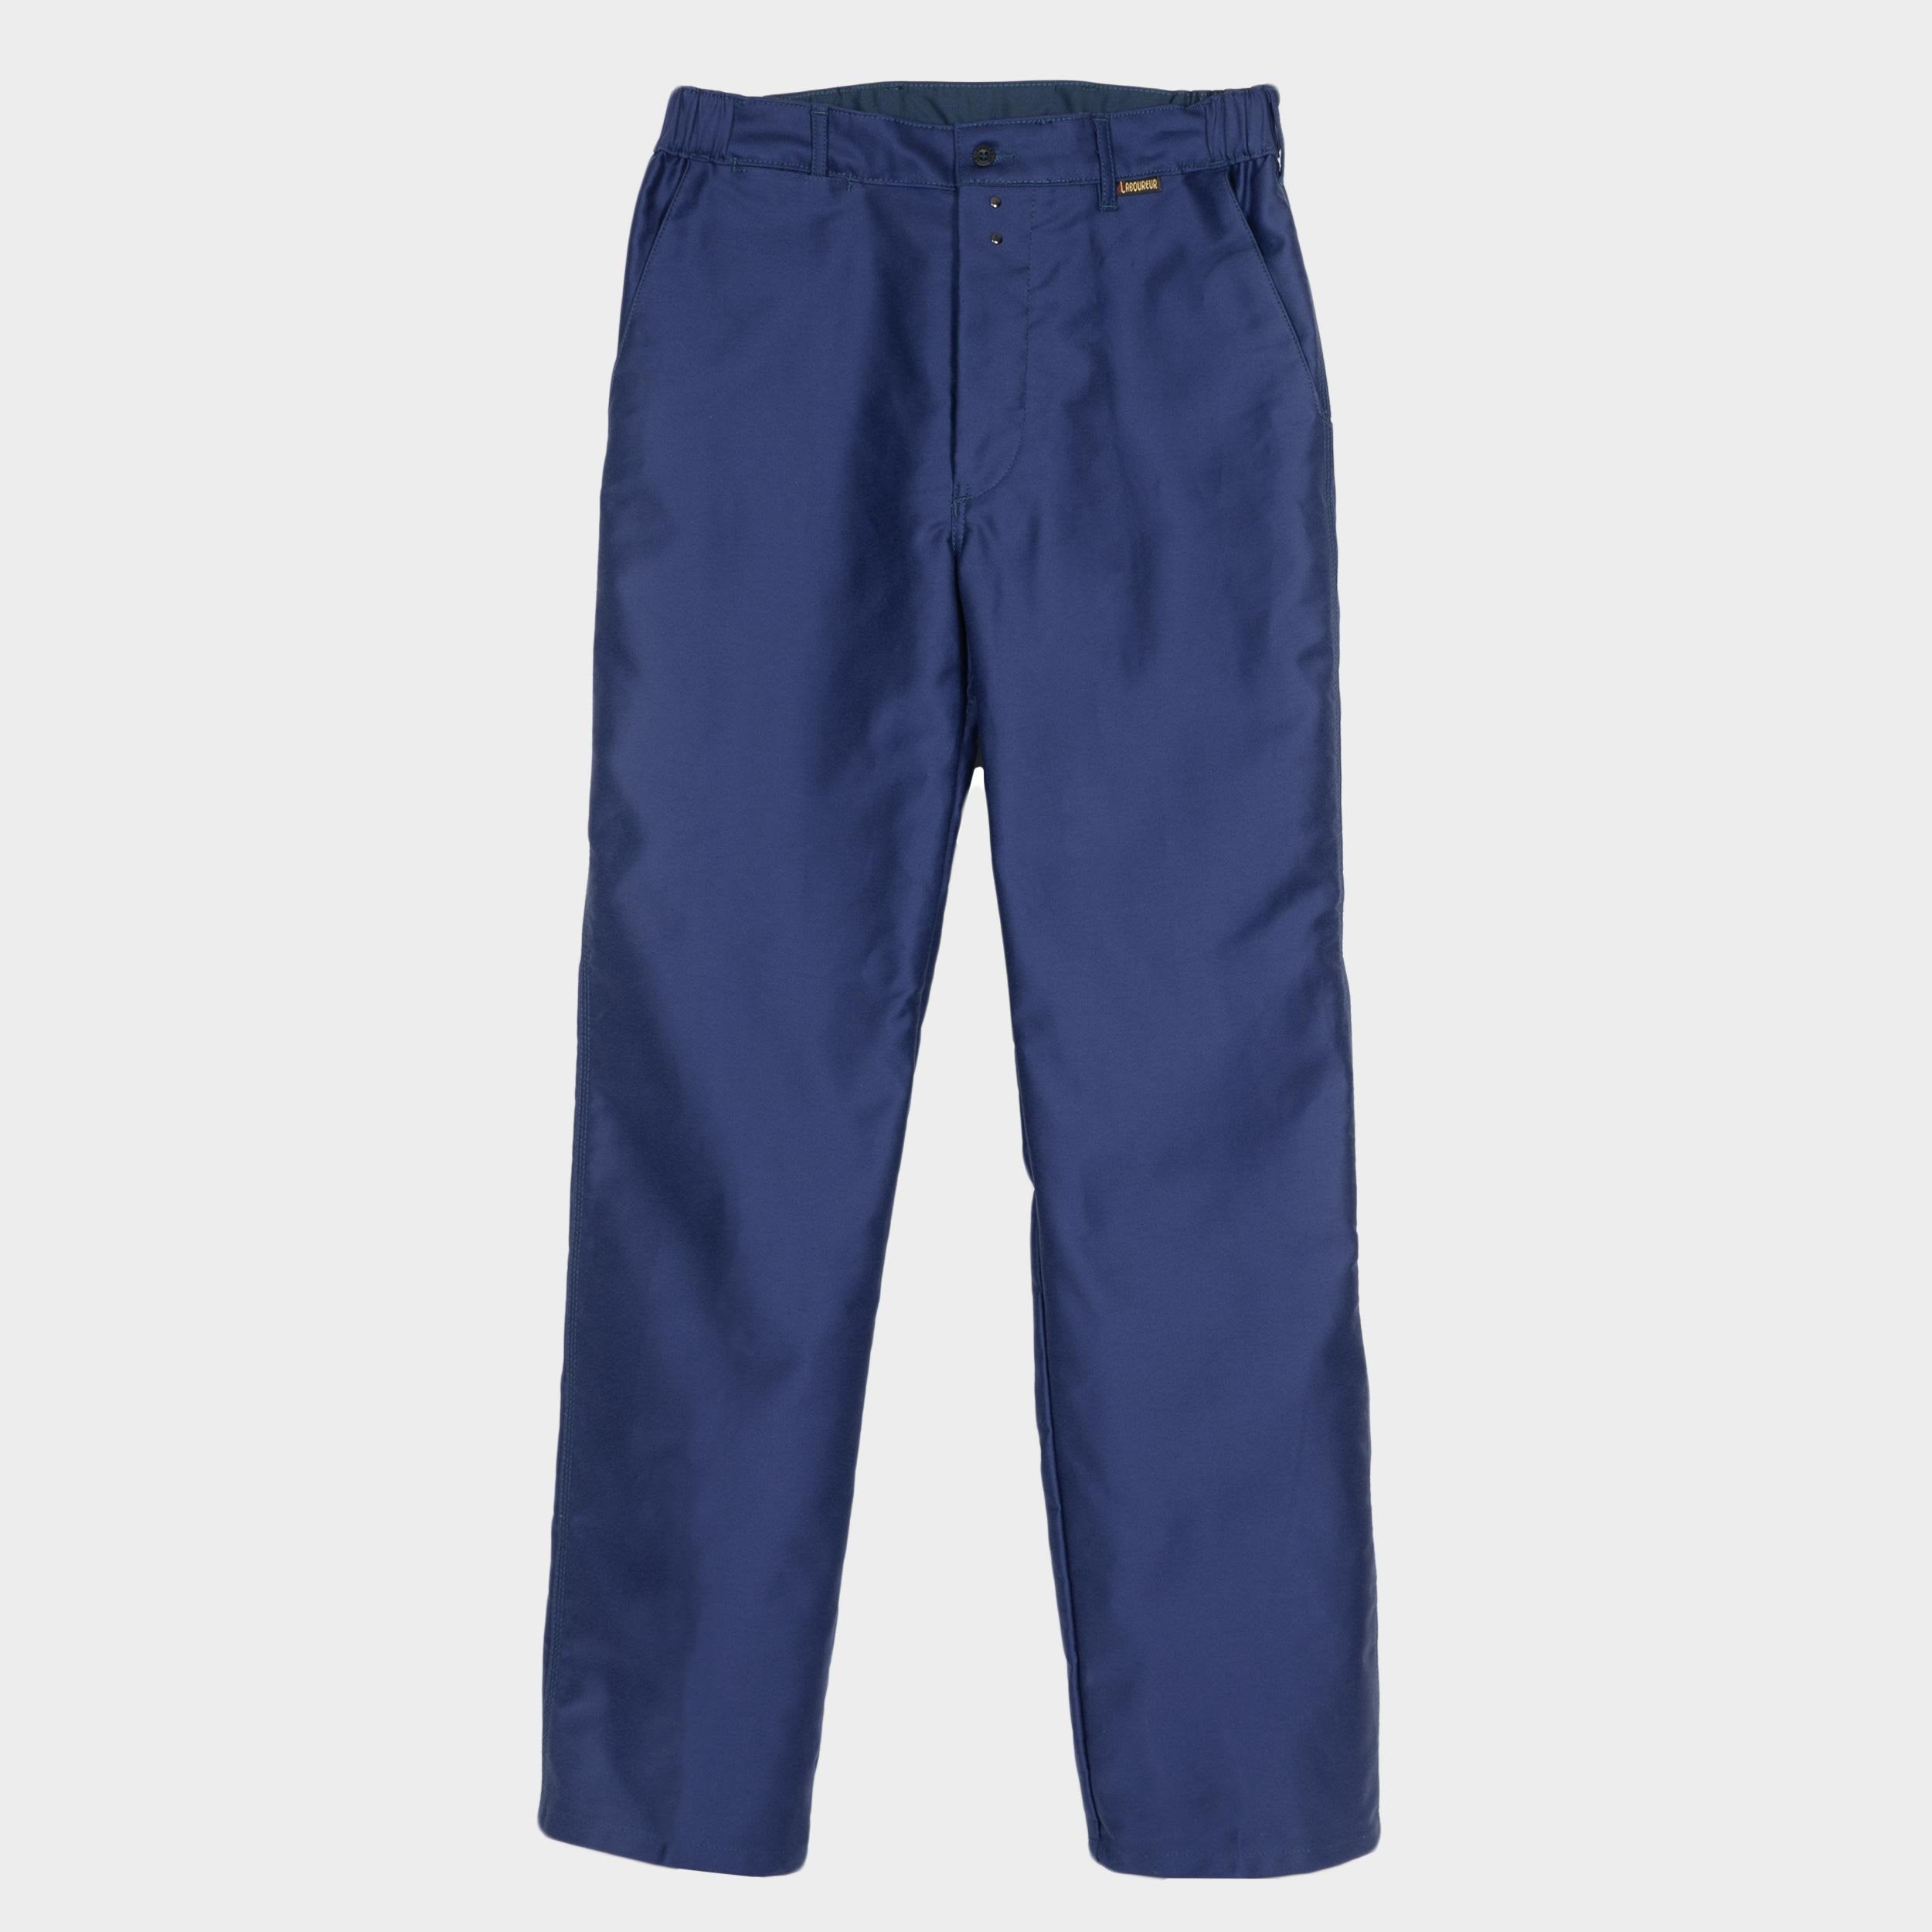 Le Laboureur French Moleskin Work Pant in Navy